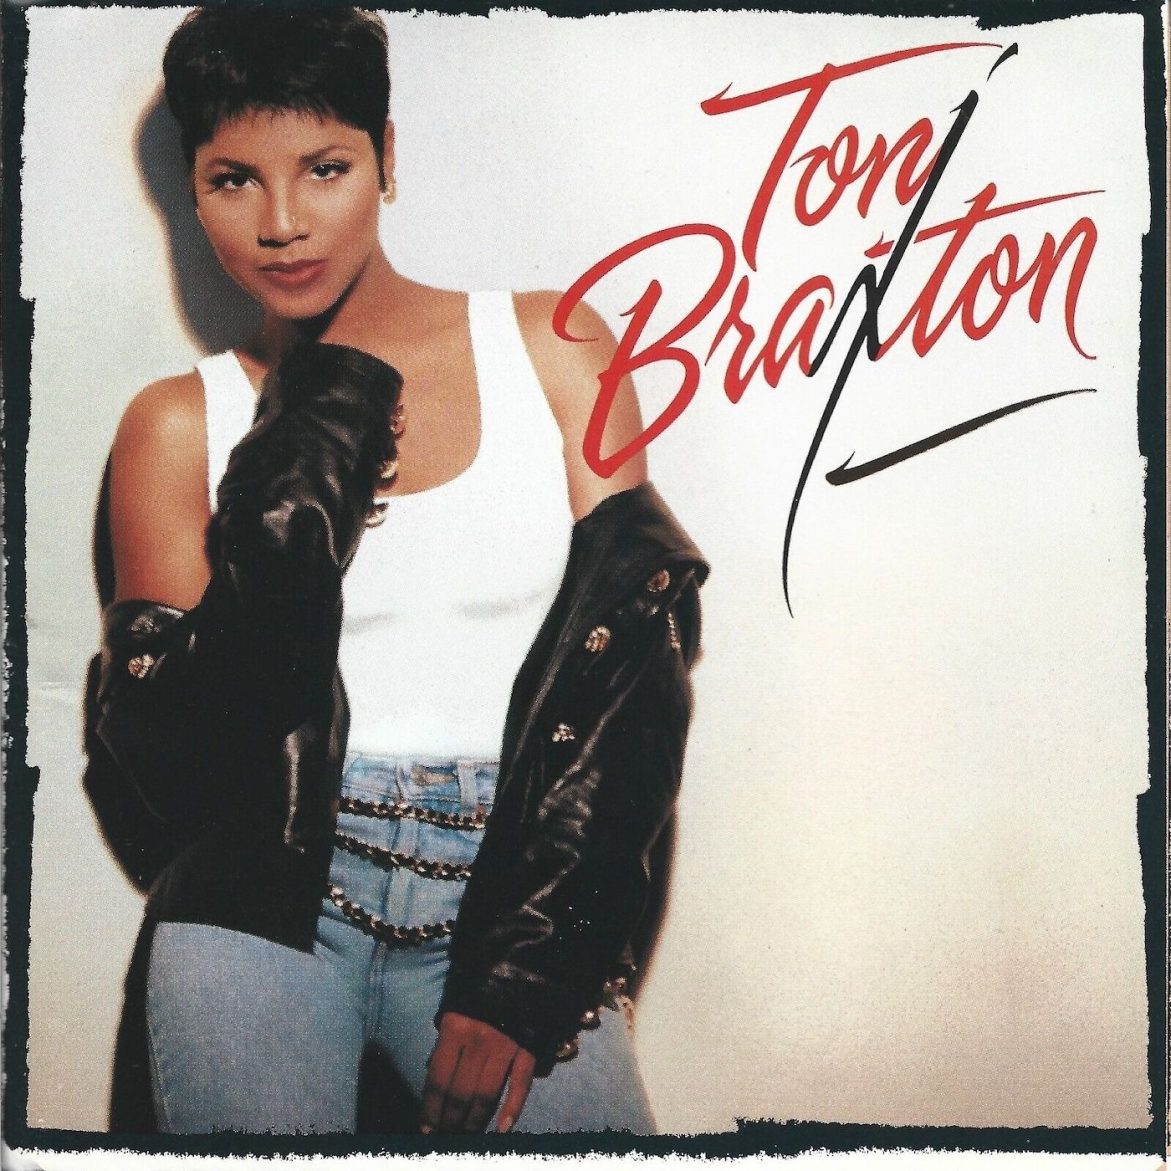 Black Podcasting - Toni Braxton: Toni Braxton (1993). "There Can Only Be One..."